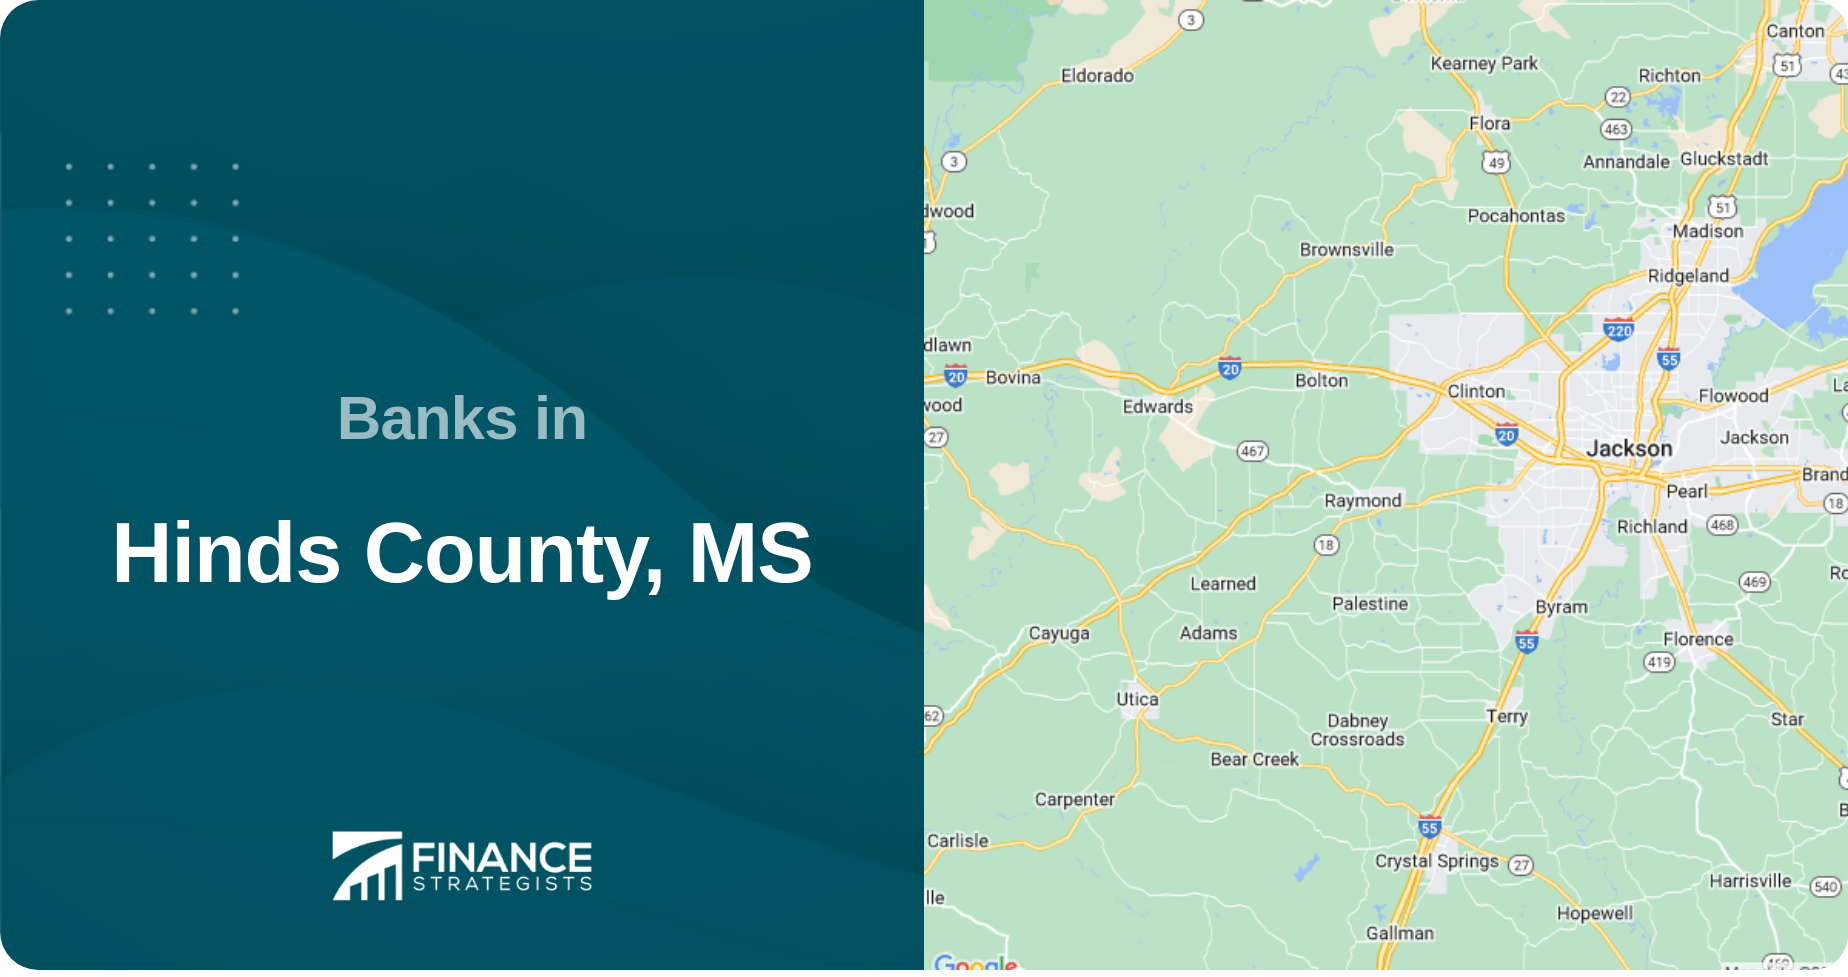 Image of Hinds County, MS